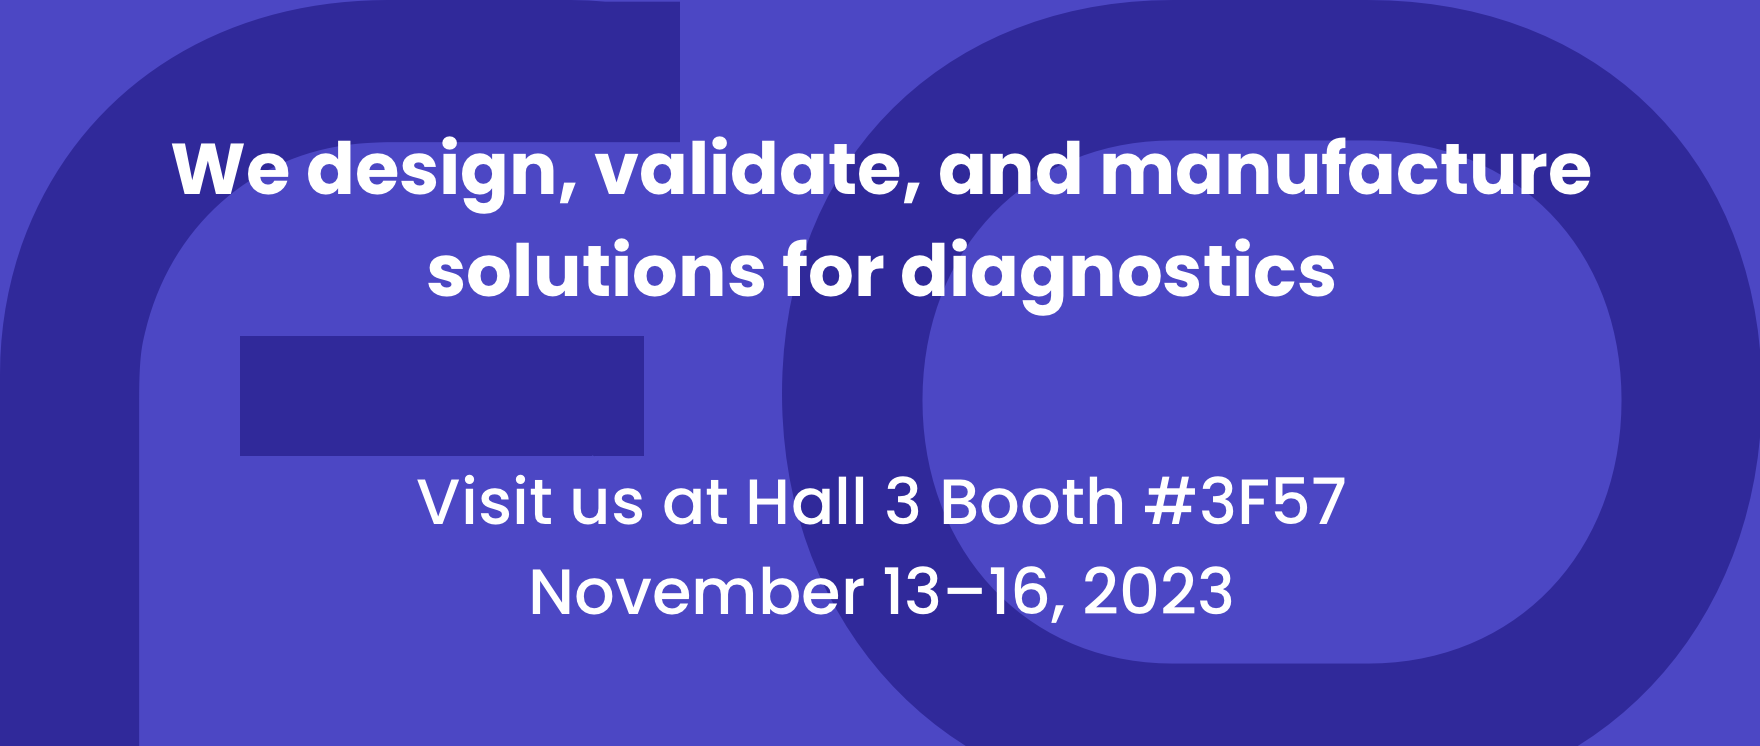 We design, validate, and manufacture solutions for diagnostics,
Visit us at Hall 3 booth # 3F57,
November 13–16, 2023
